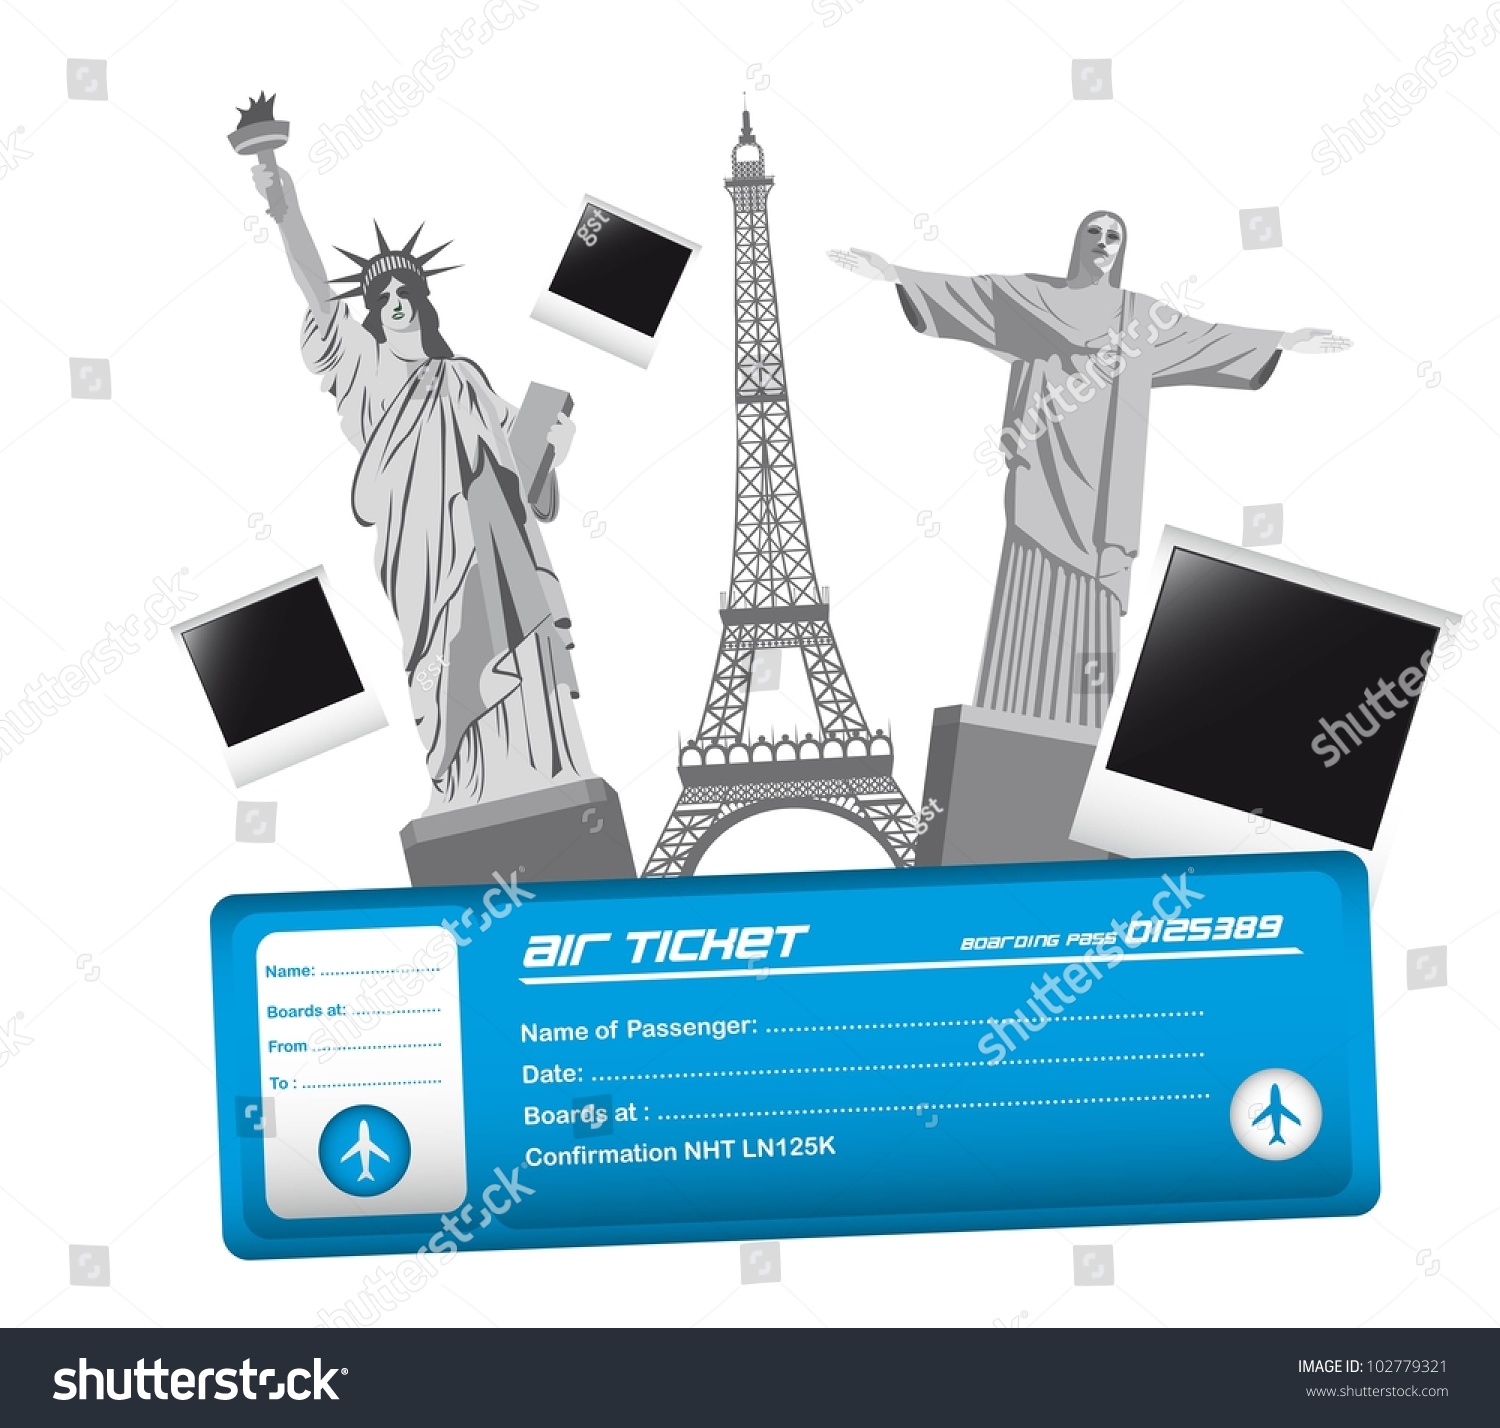 SVG of world monuments and air ticket, travel. vector illustration svg